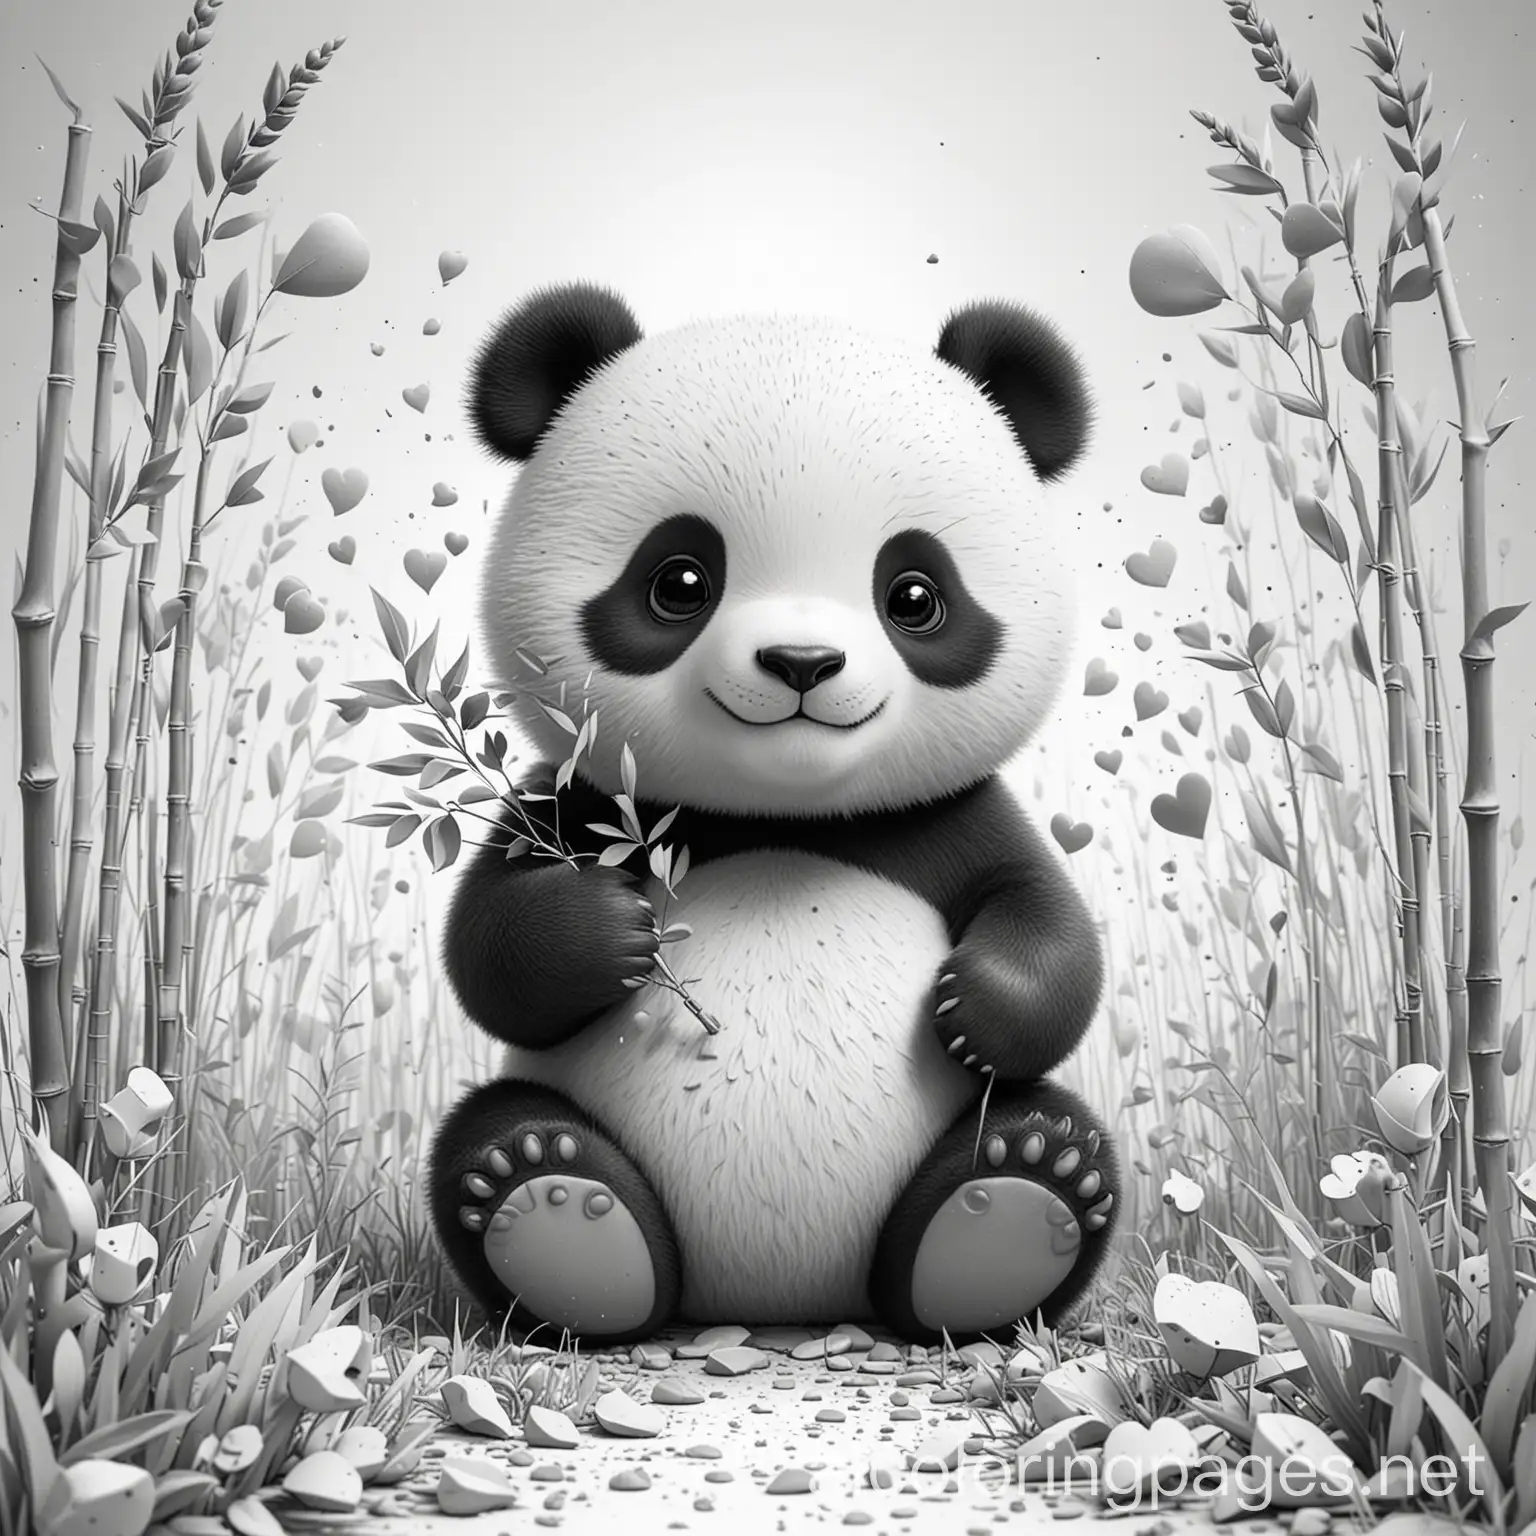 Adorable-Kawaii-Panda-with-Bamboo-Shoot-in-Heartfilled-Field-Coloring-Page